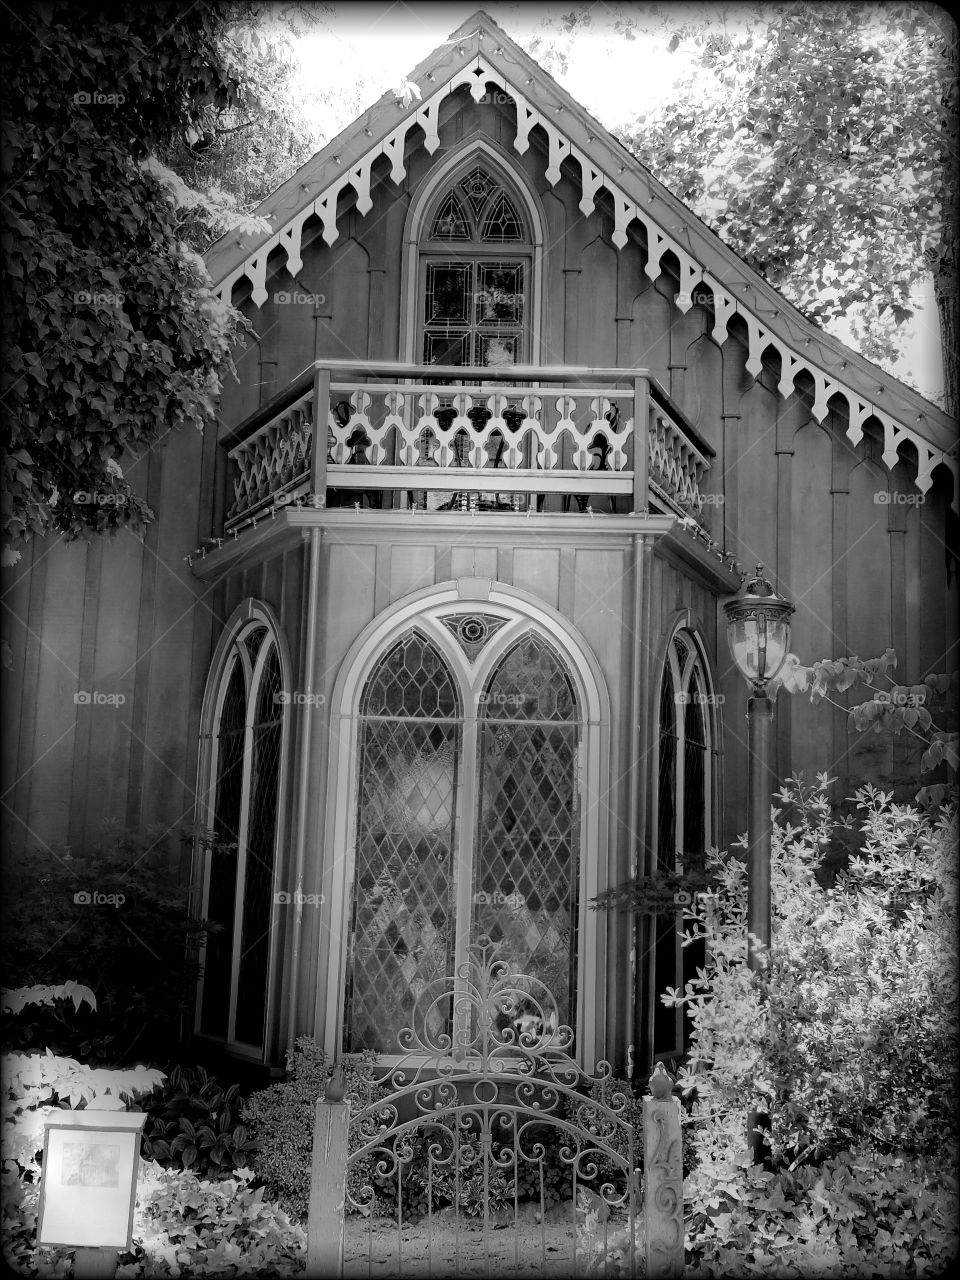 B & W house with detail